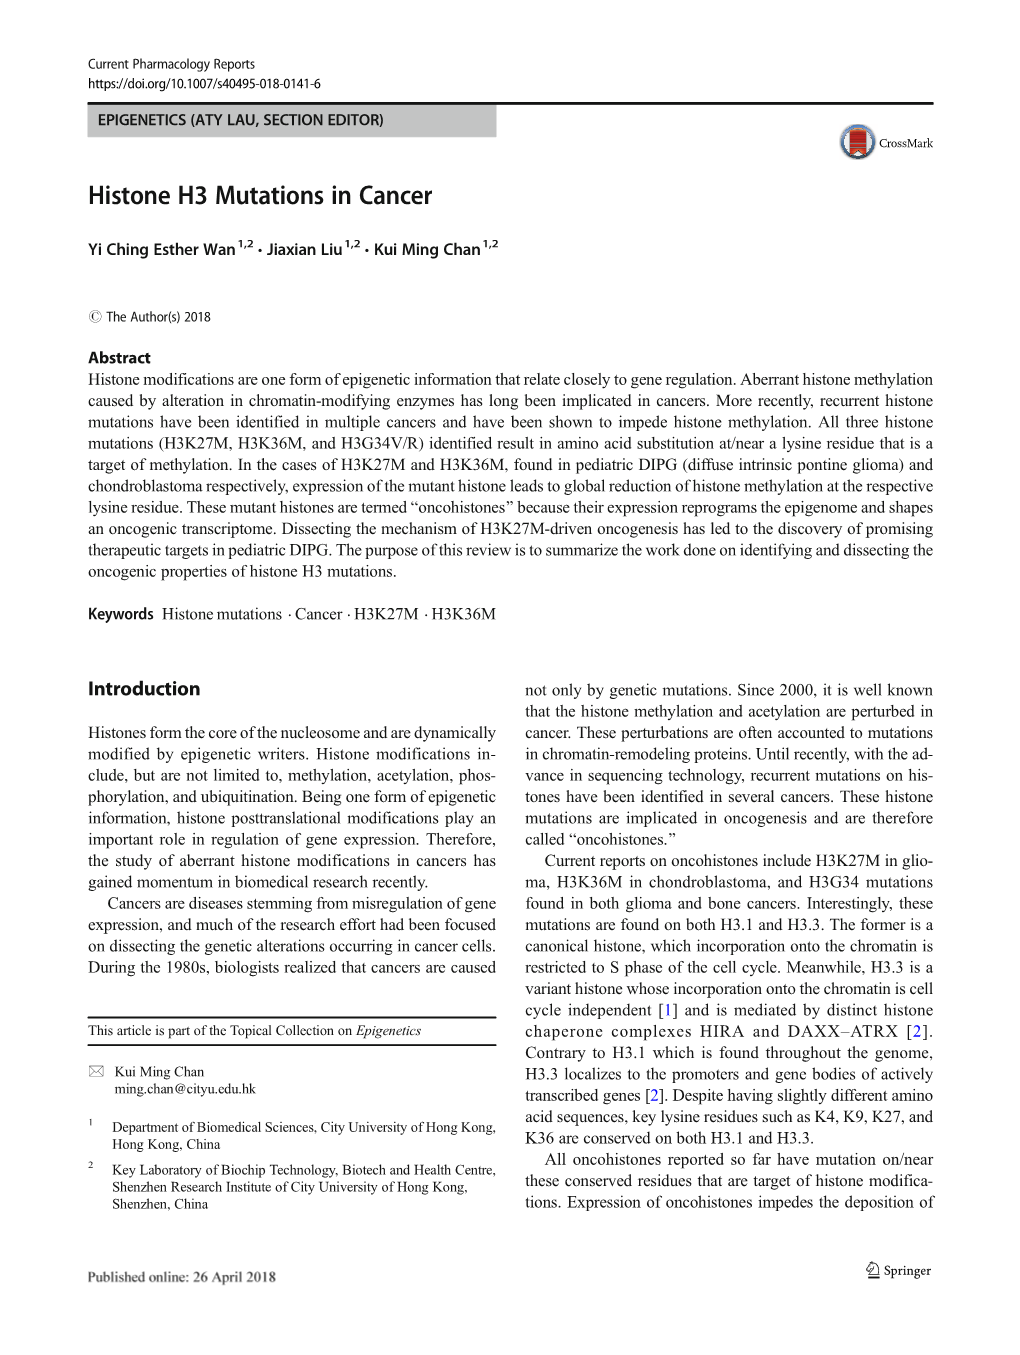 Histone H3 Mutations in Cancer